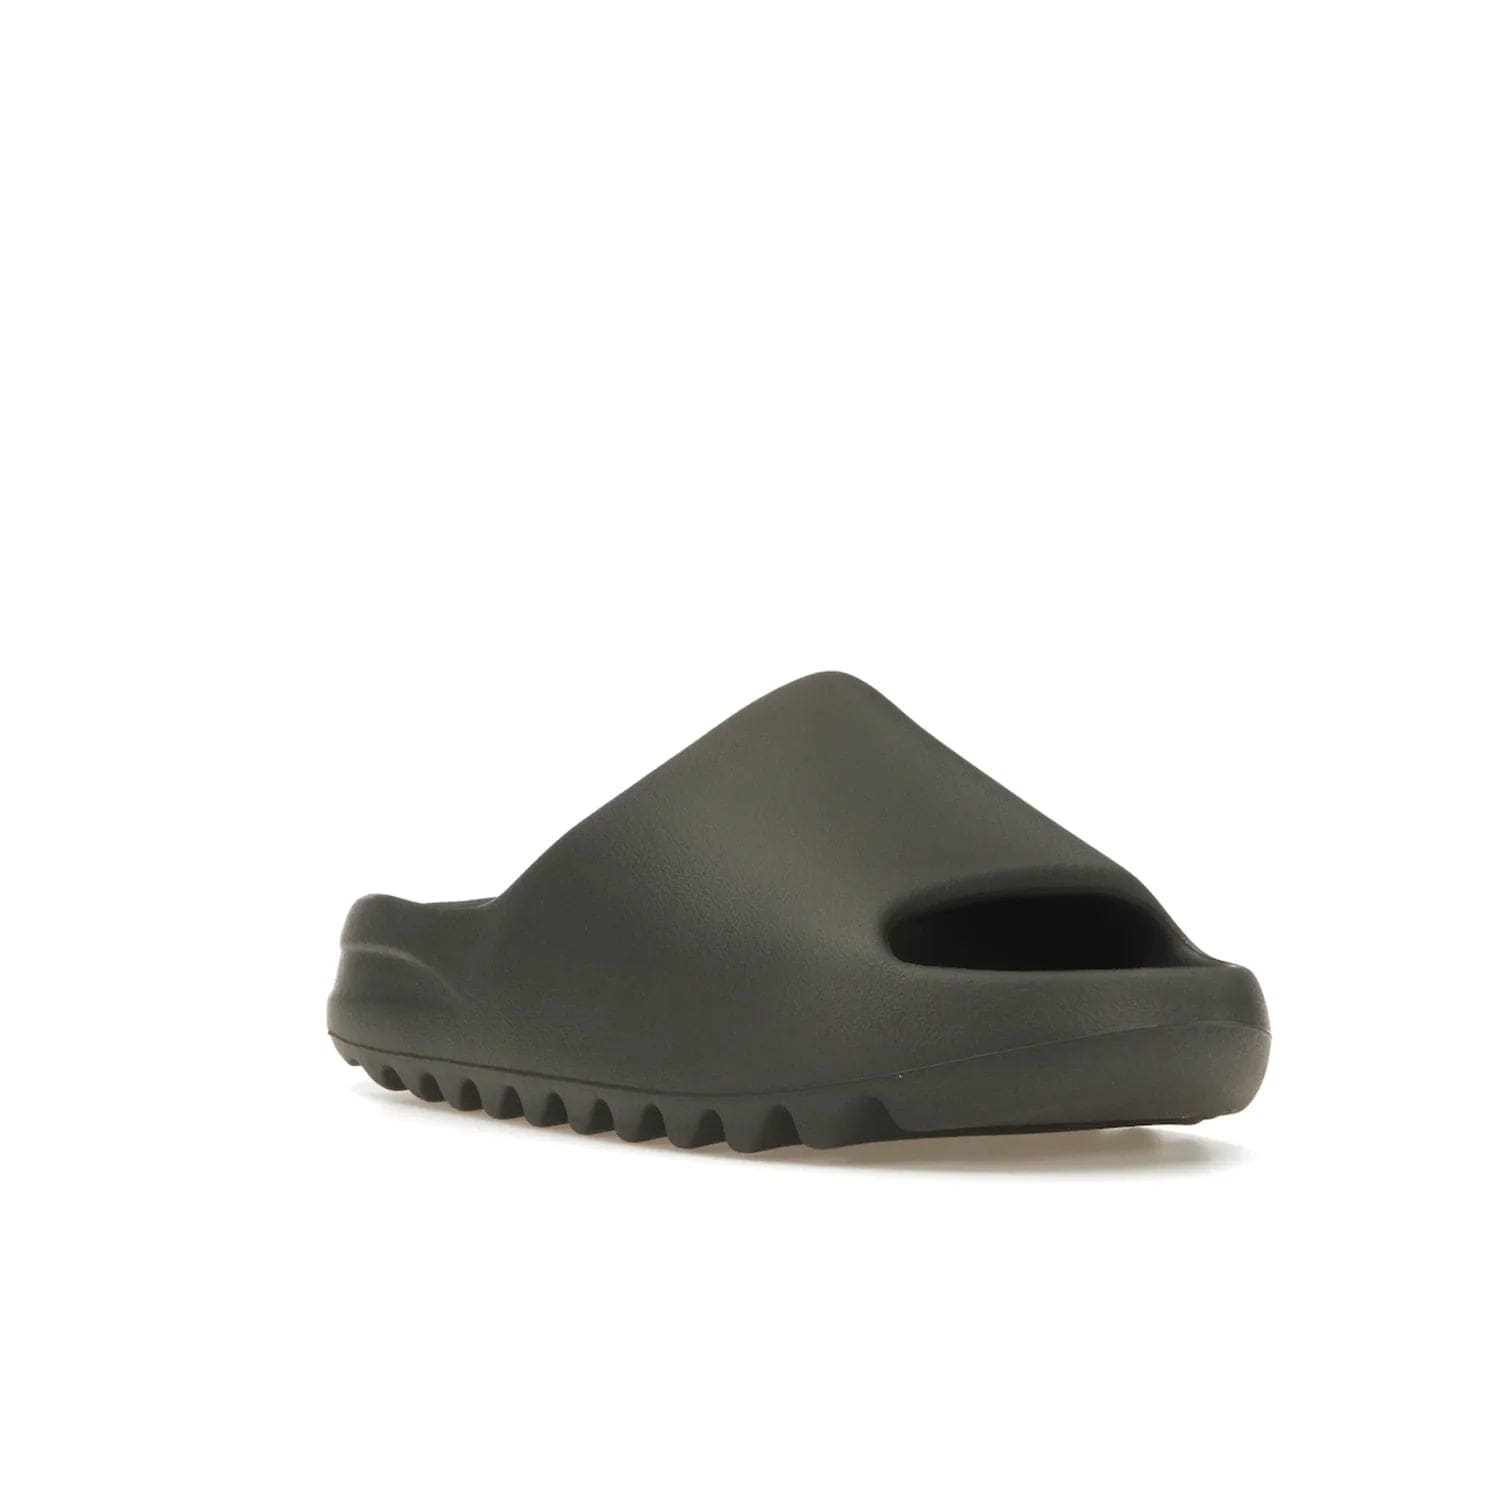 adidas Yeezy Slide Granite - Image 6 - Only at www.BallersClubKickz.com - Introducing the adidas Yeezy Slide Granite with a sleek, soft-to-touch one-piece upper – perfect for making a statement with its minimalistic design and luxurious comfort. Get yours now for only $70.